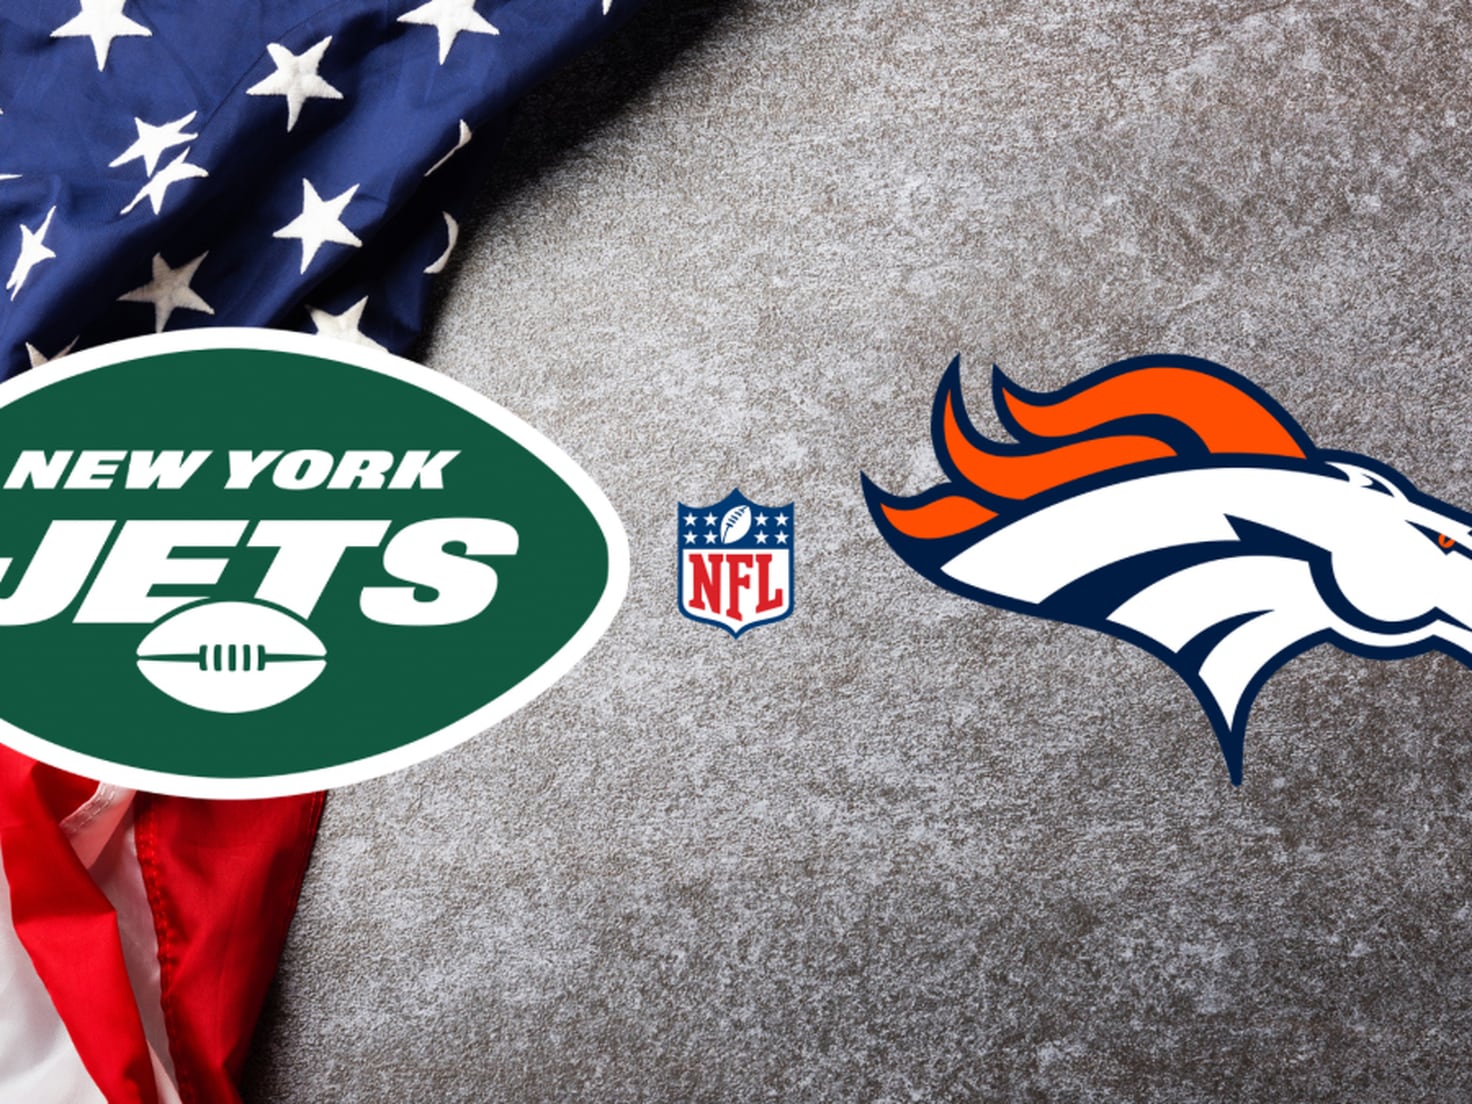 New York Jets vs Denver Broncos: times, how to watch on TV, stream online